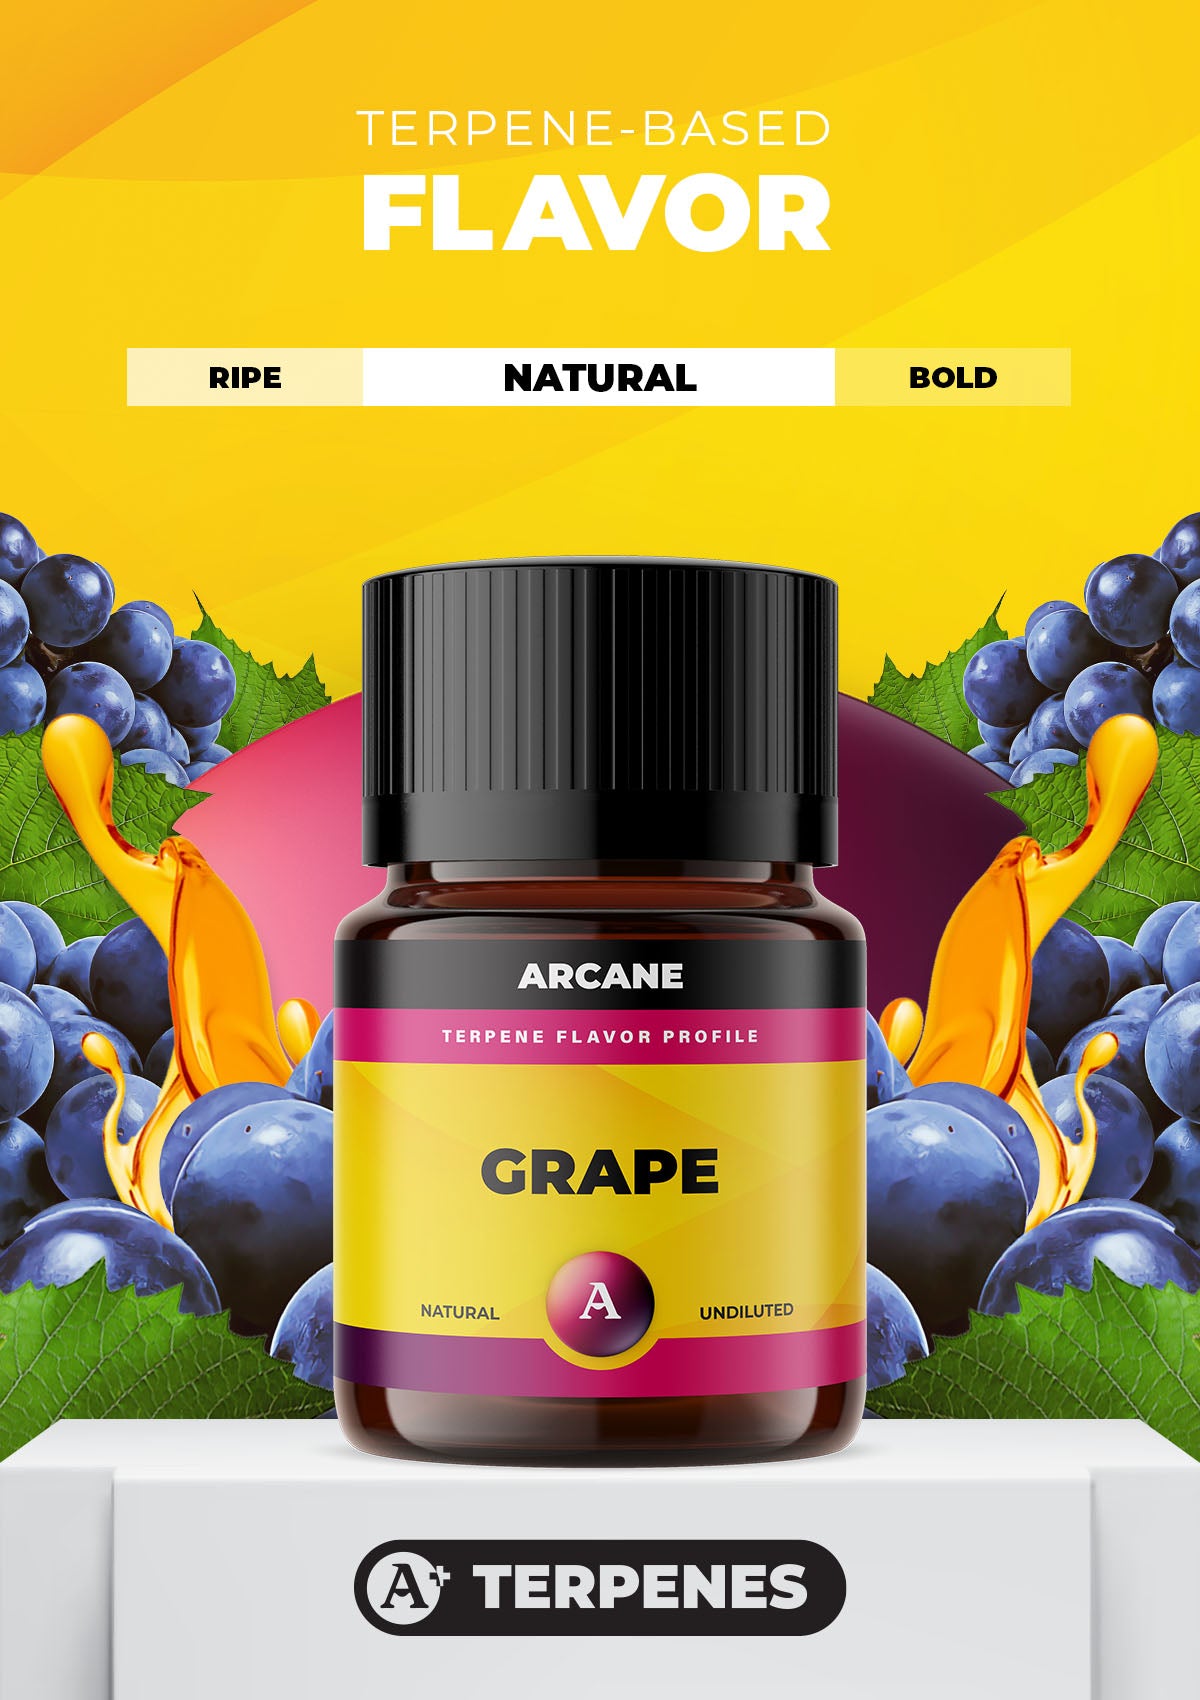 Arcane Aromatics All-Natural Botanical Terpene Flavors. Grape: Ripe and bold grapes with a punch of purple essence. PRIMARY TERPENES: Limonene, Caryophyllene, Myrcene and Linalool.